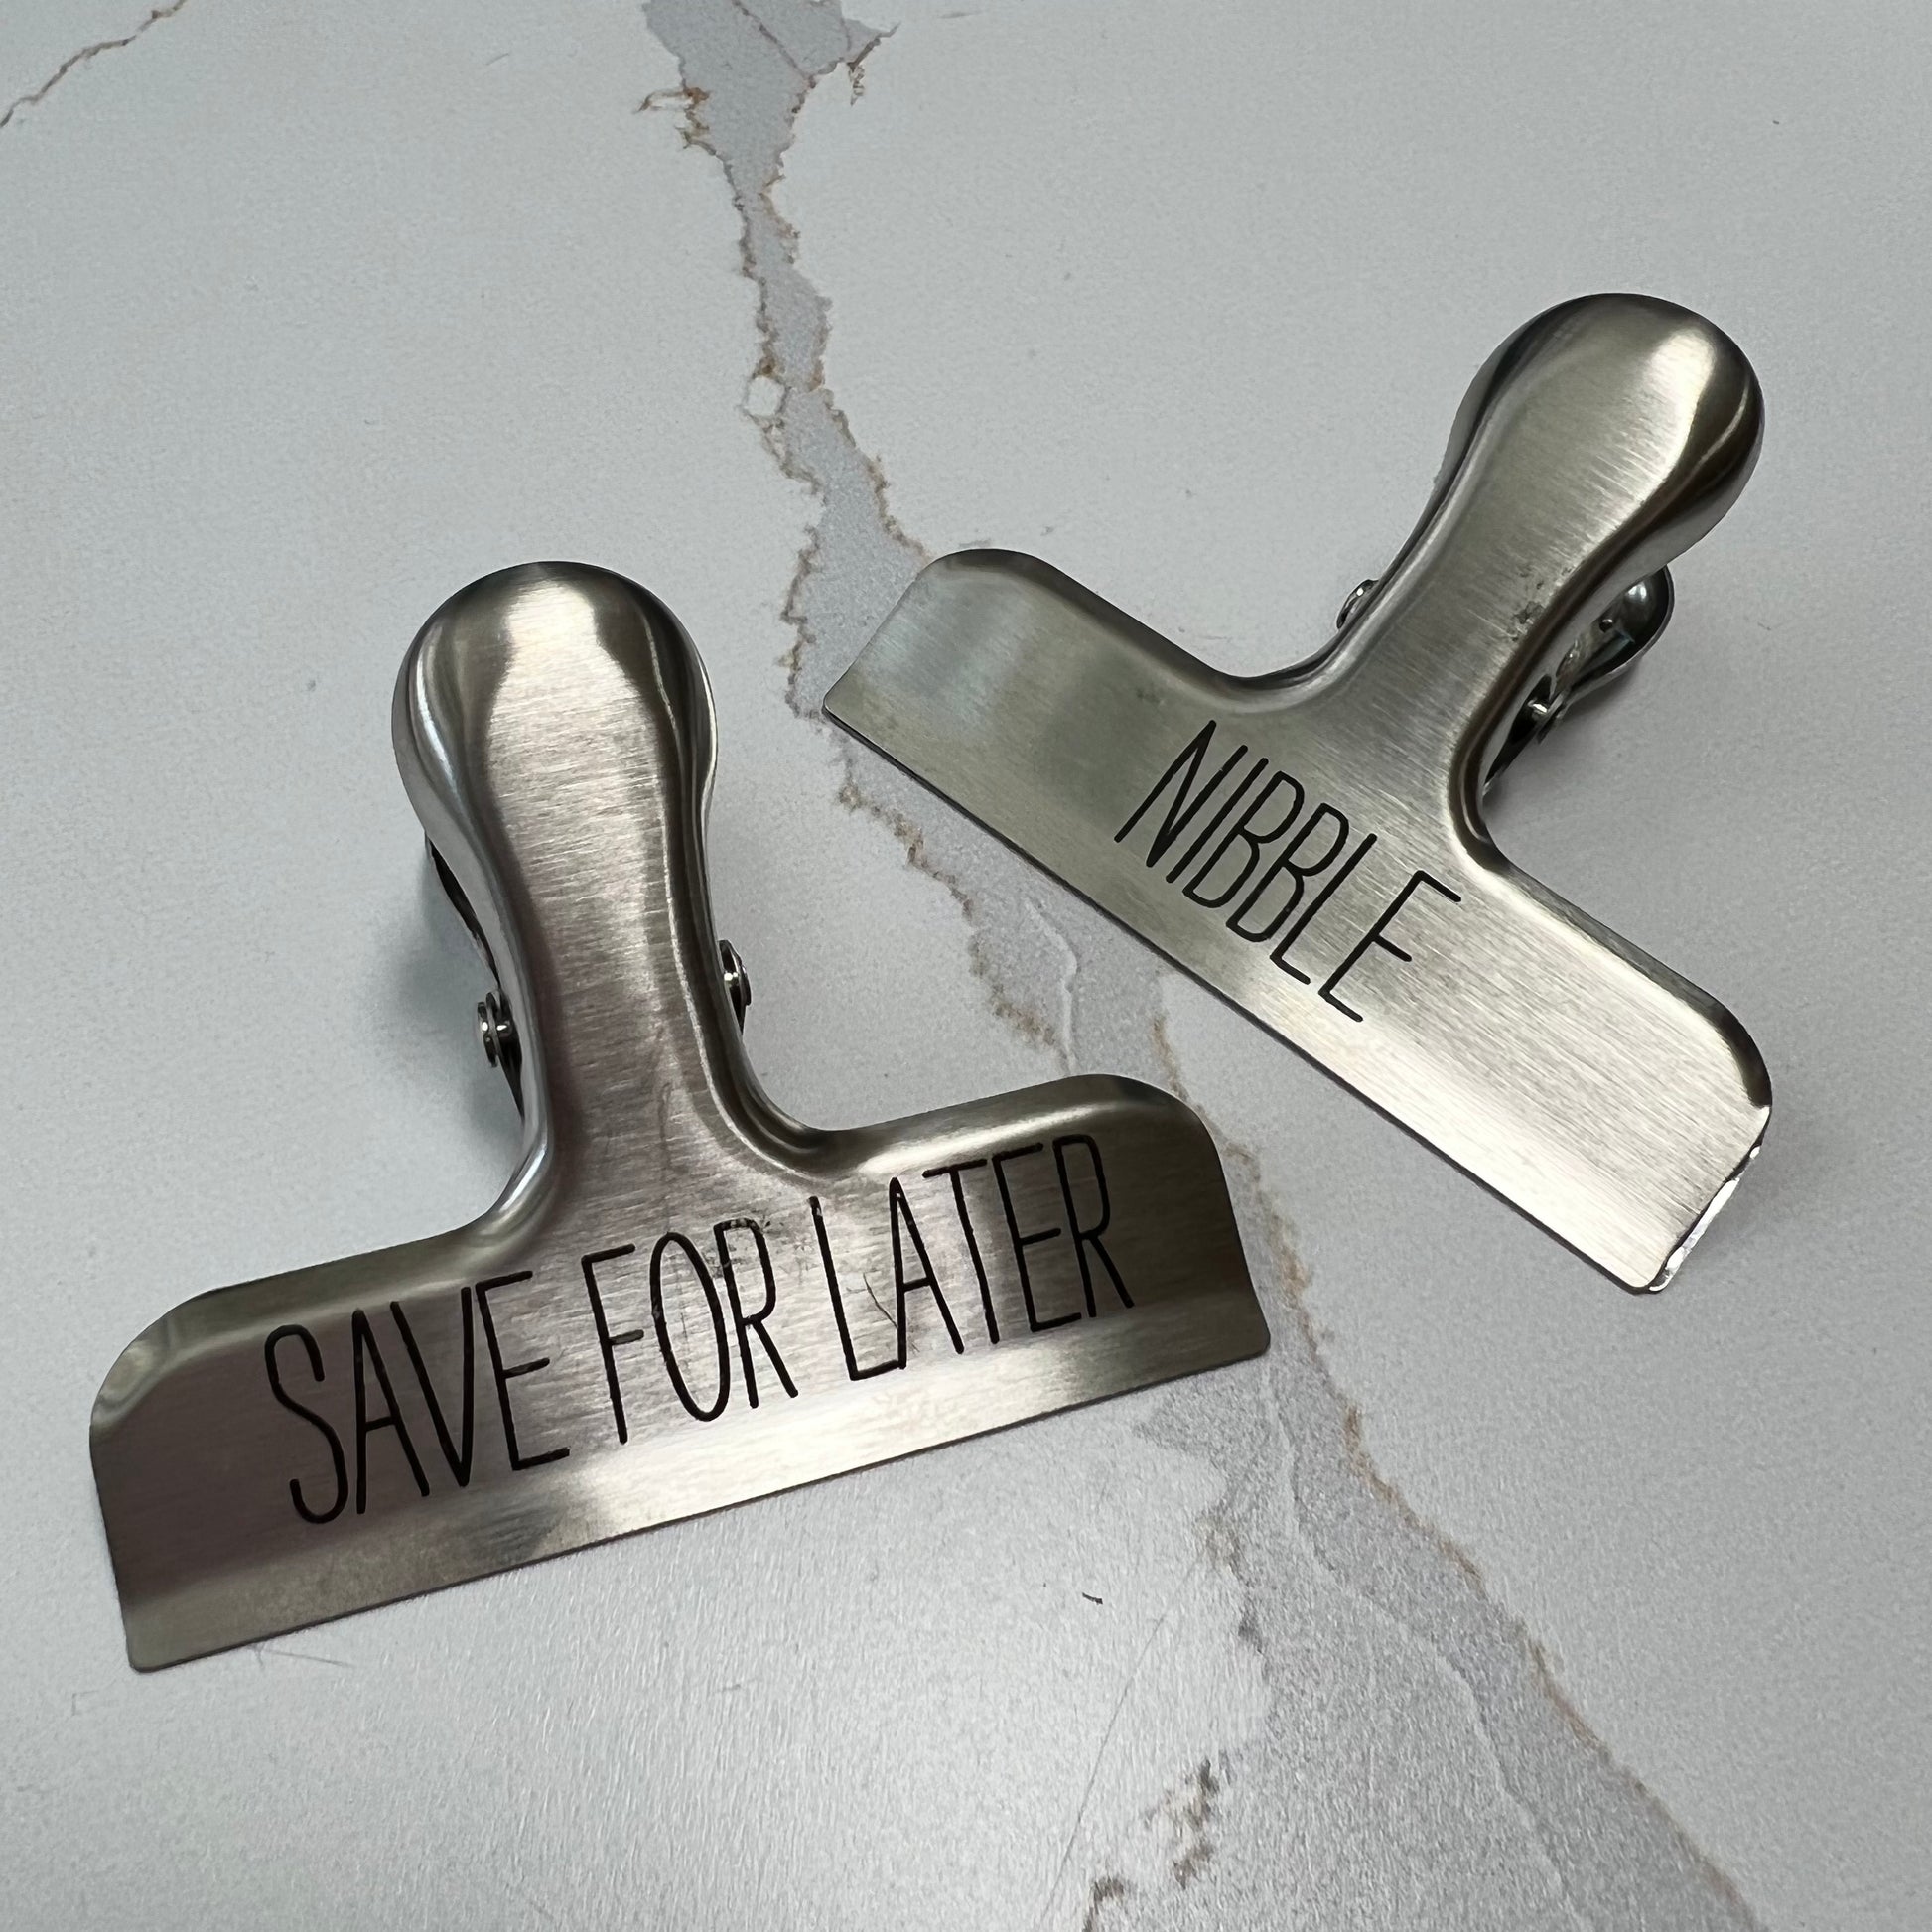 "save for later" and "nibble" bag clips on a white marble counter.